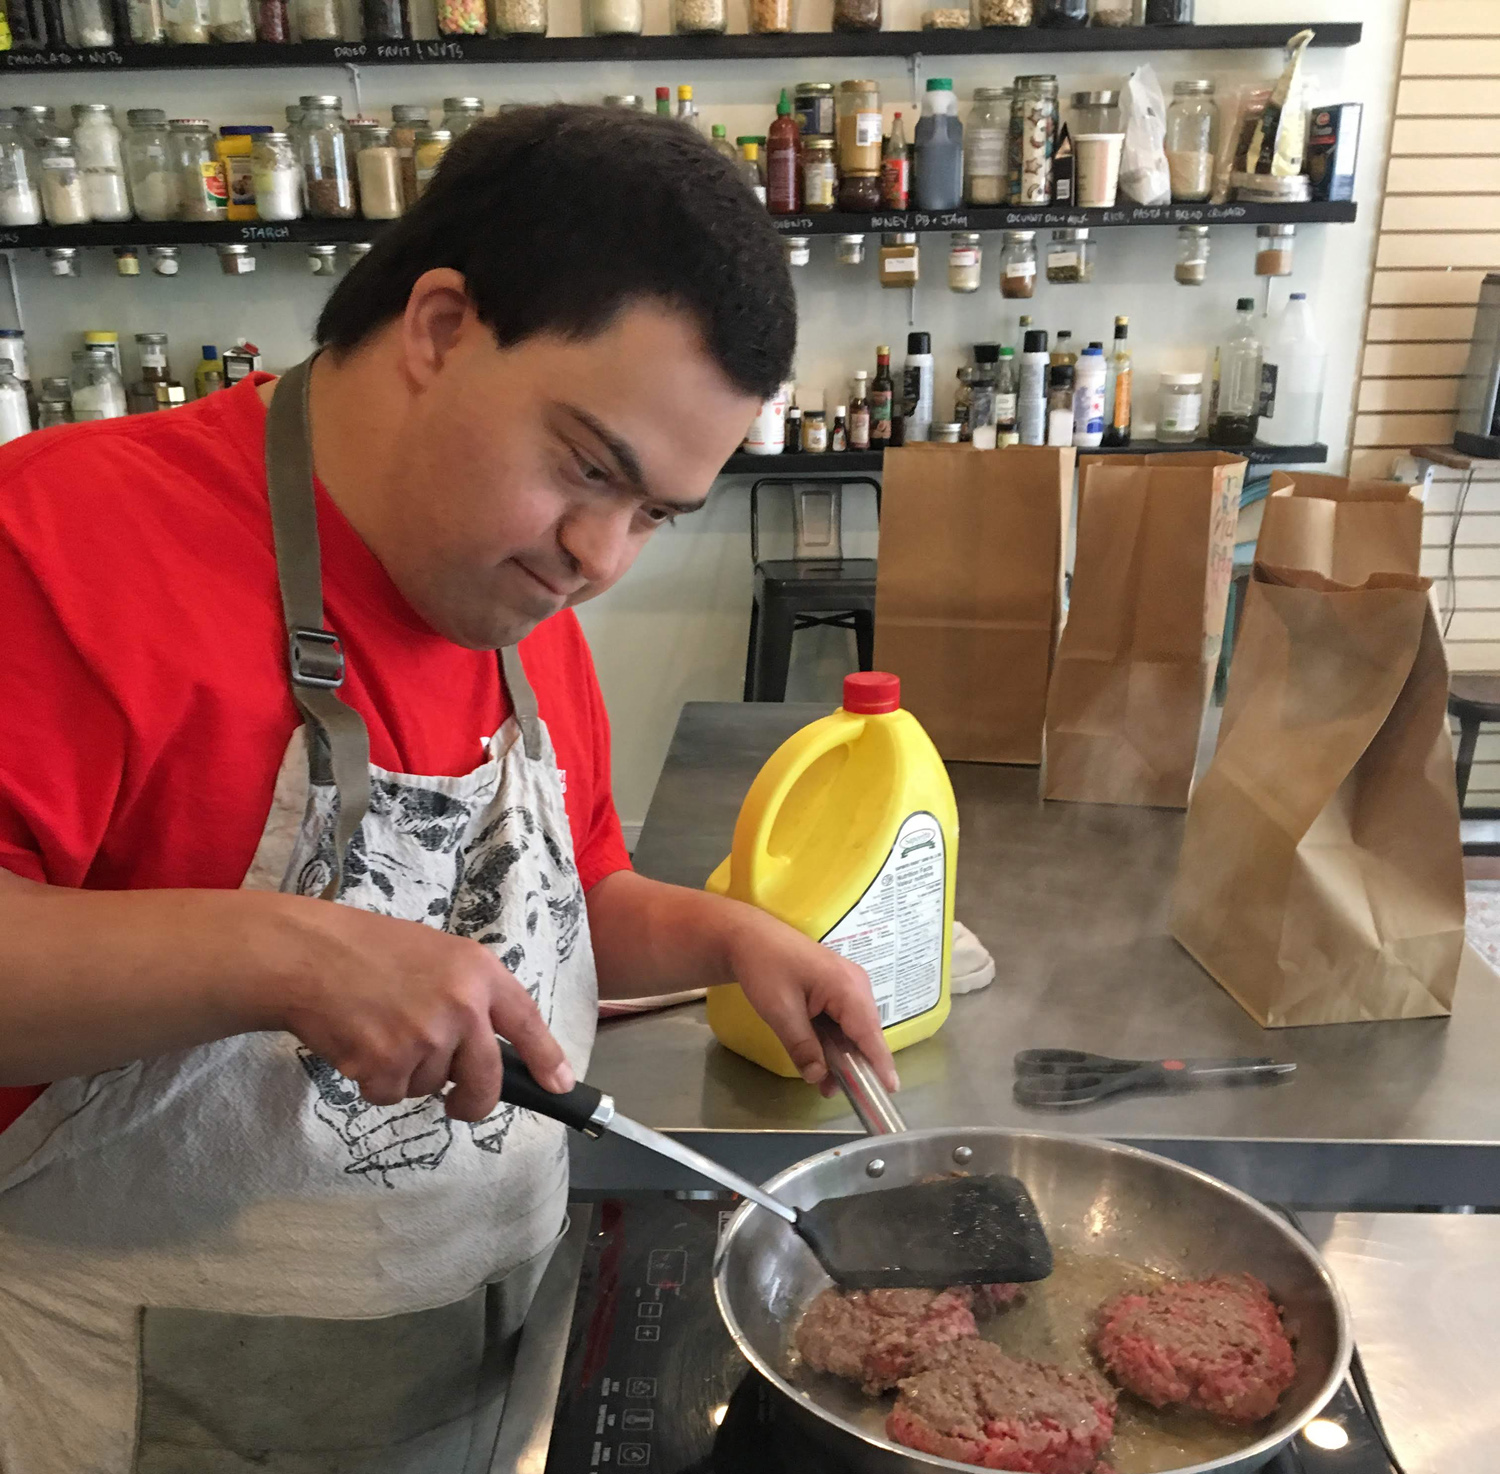 Man with Down Syndrome learns cooking and life skills at Dickie's Cooking School